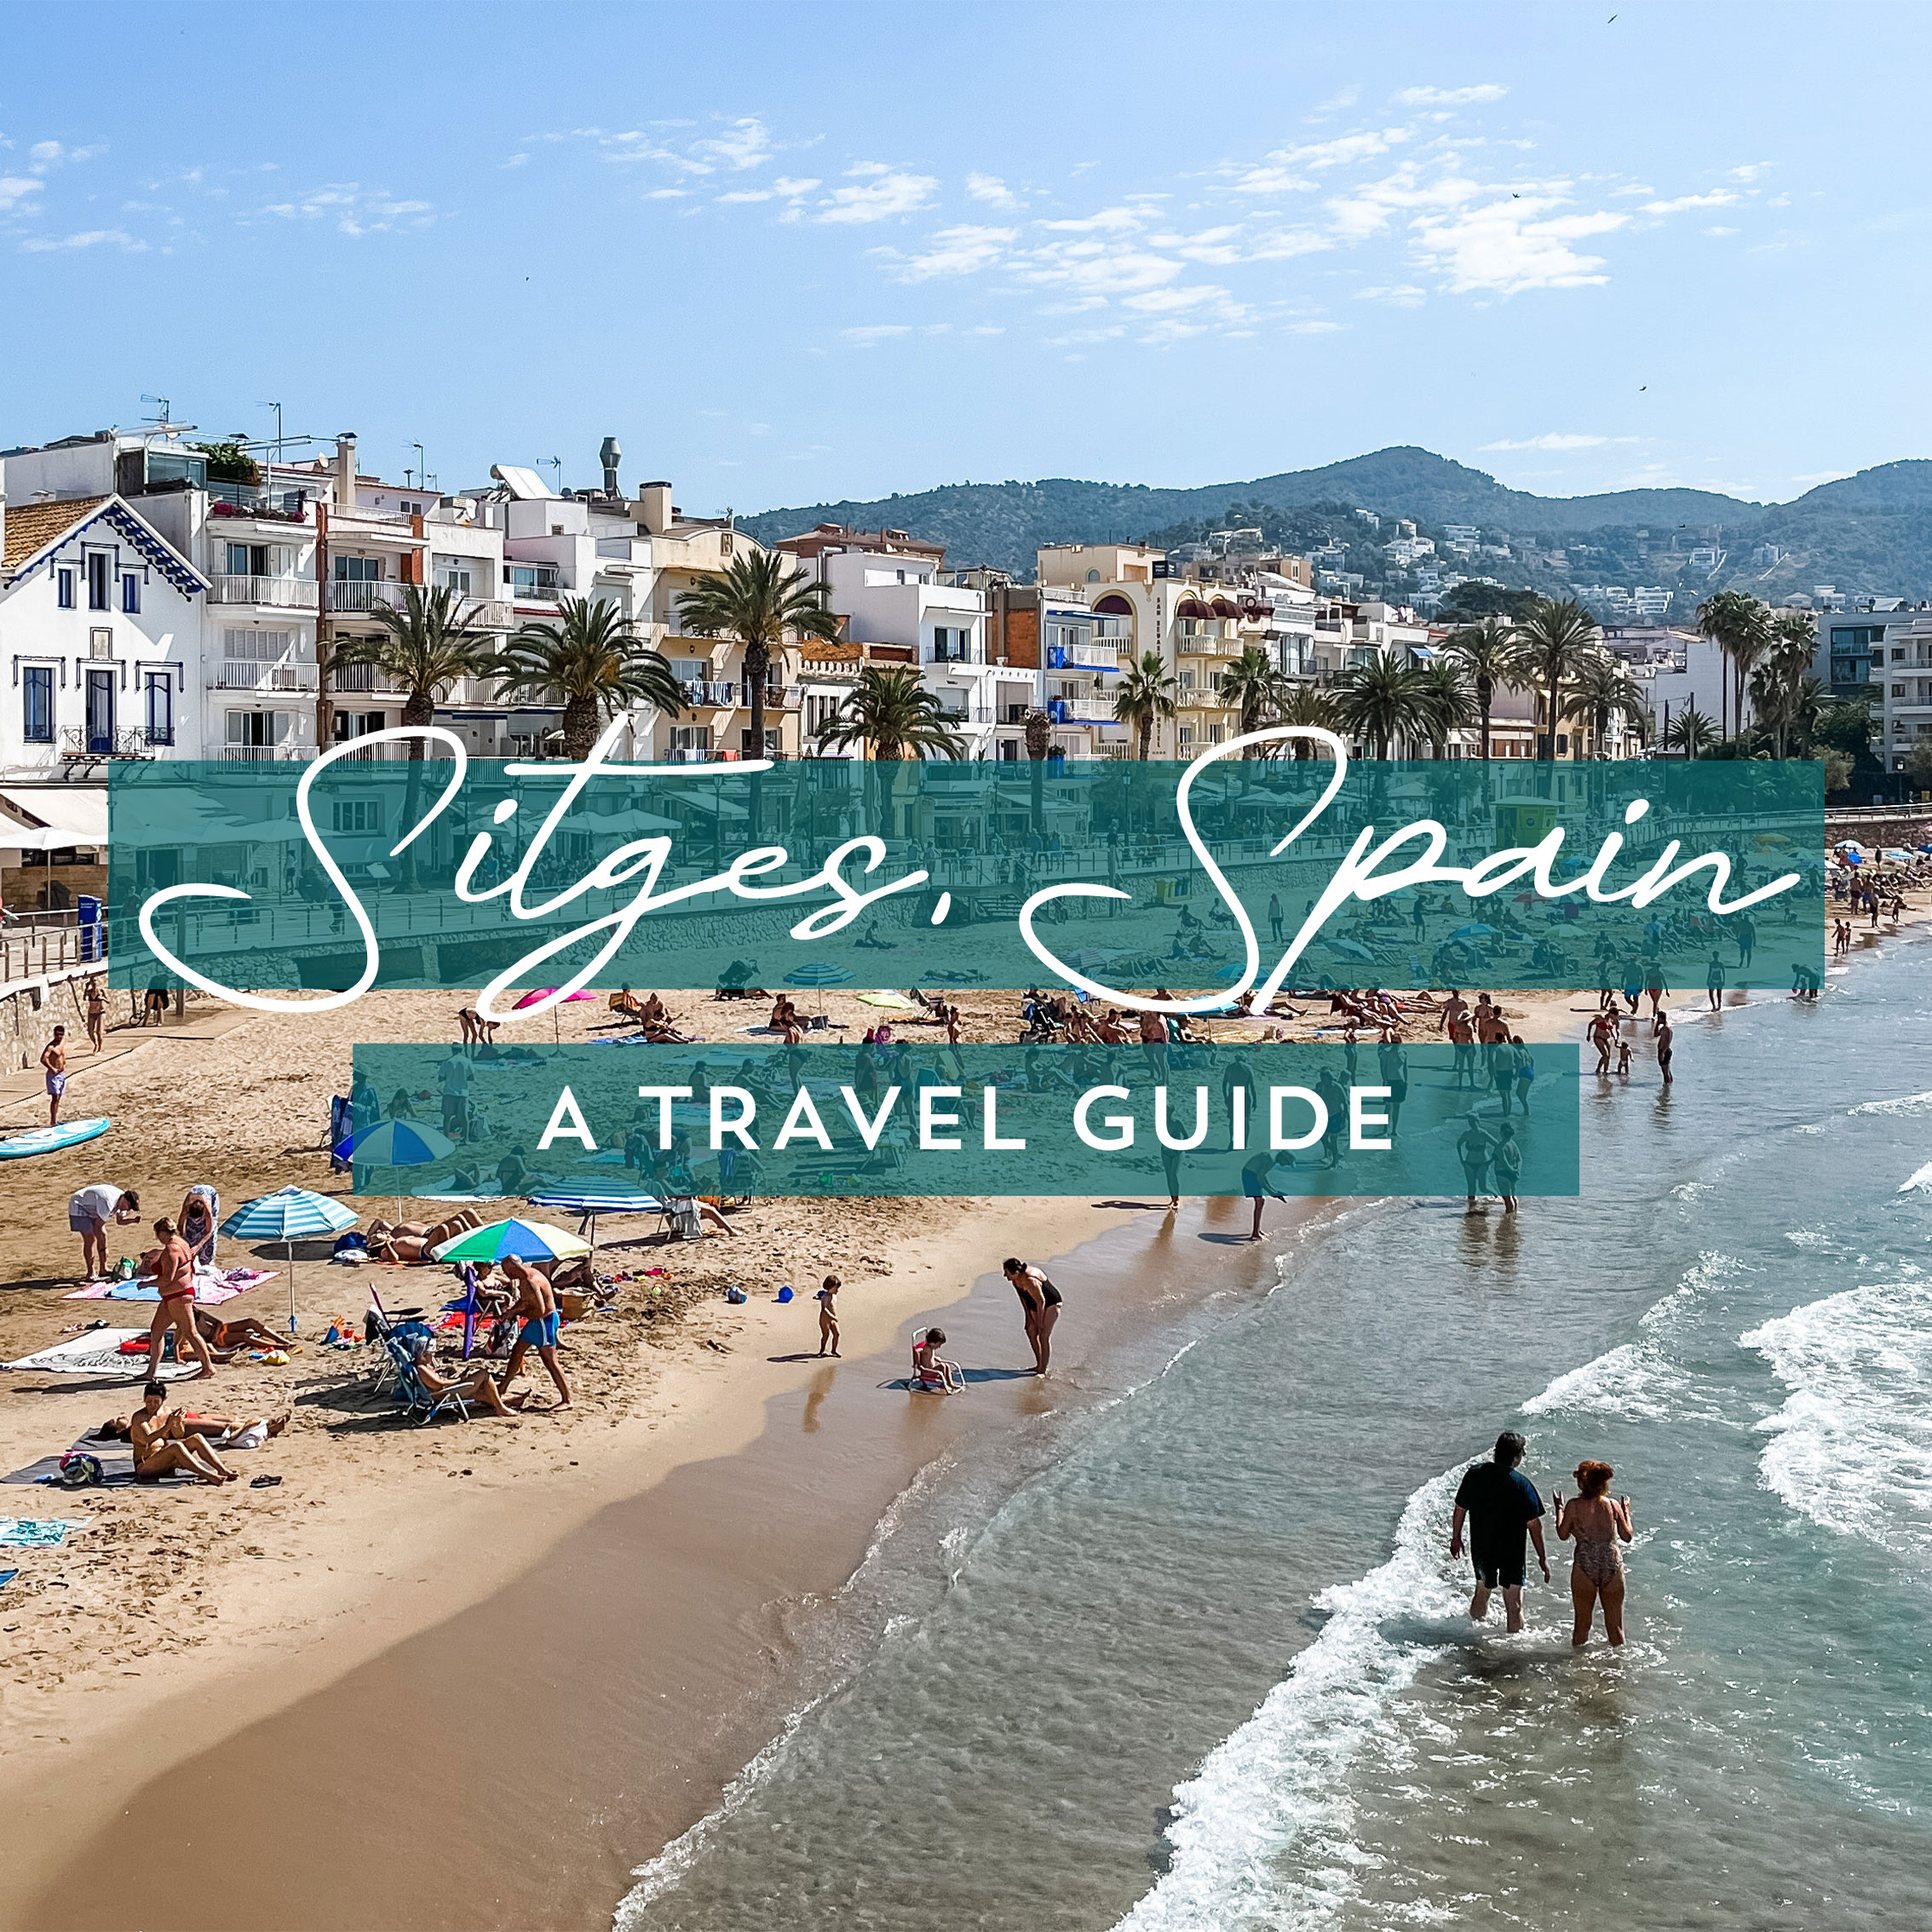 Sitges, Spain: A Travel Guide